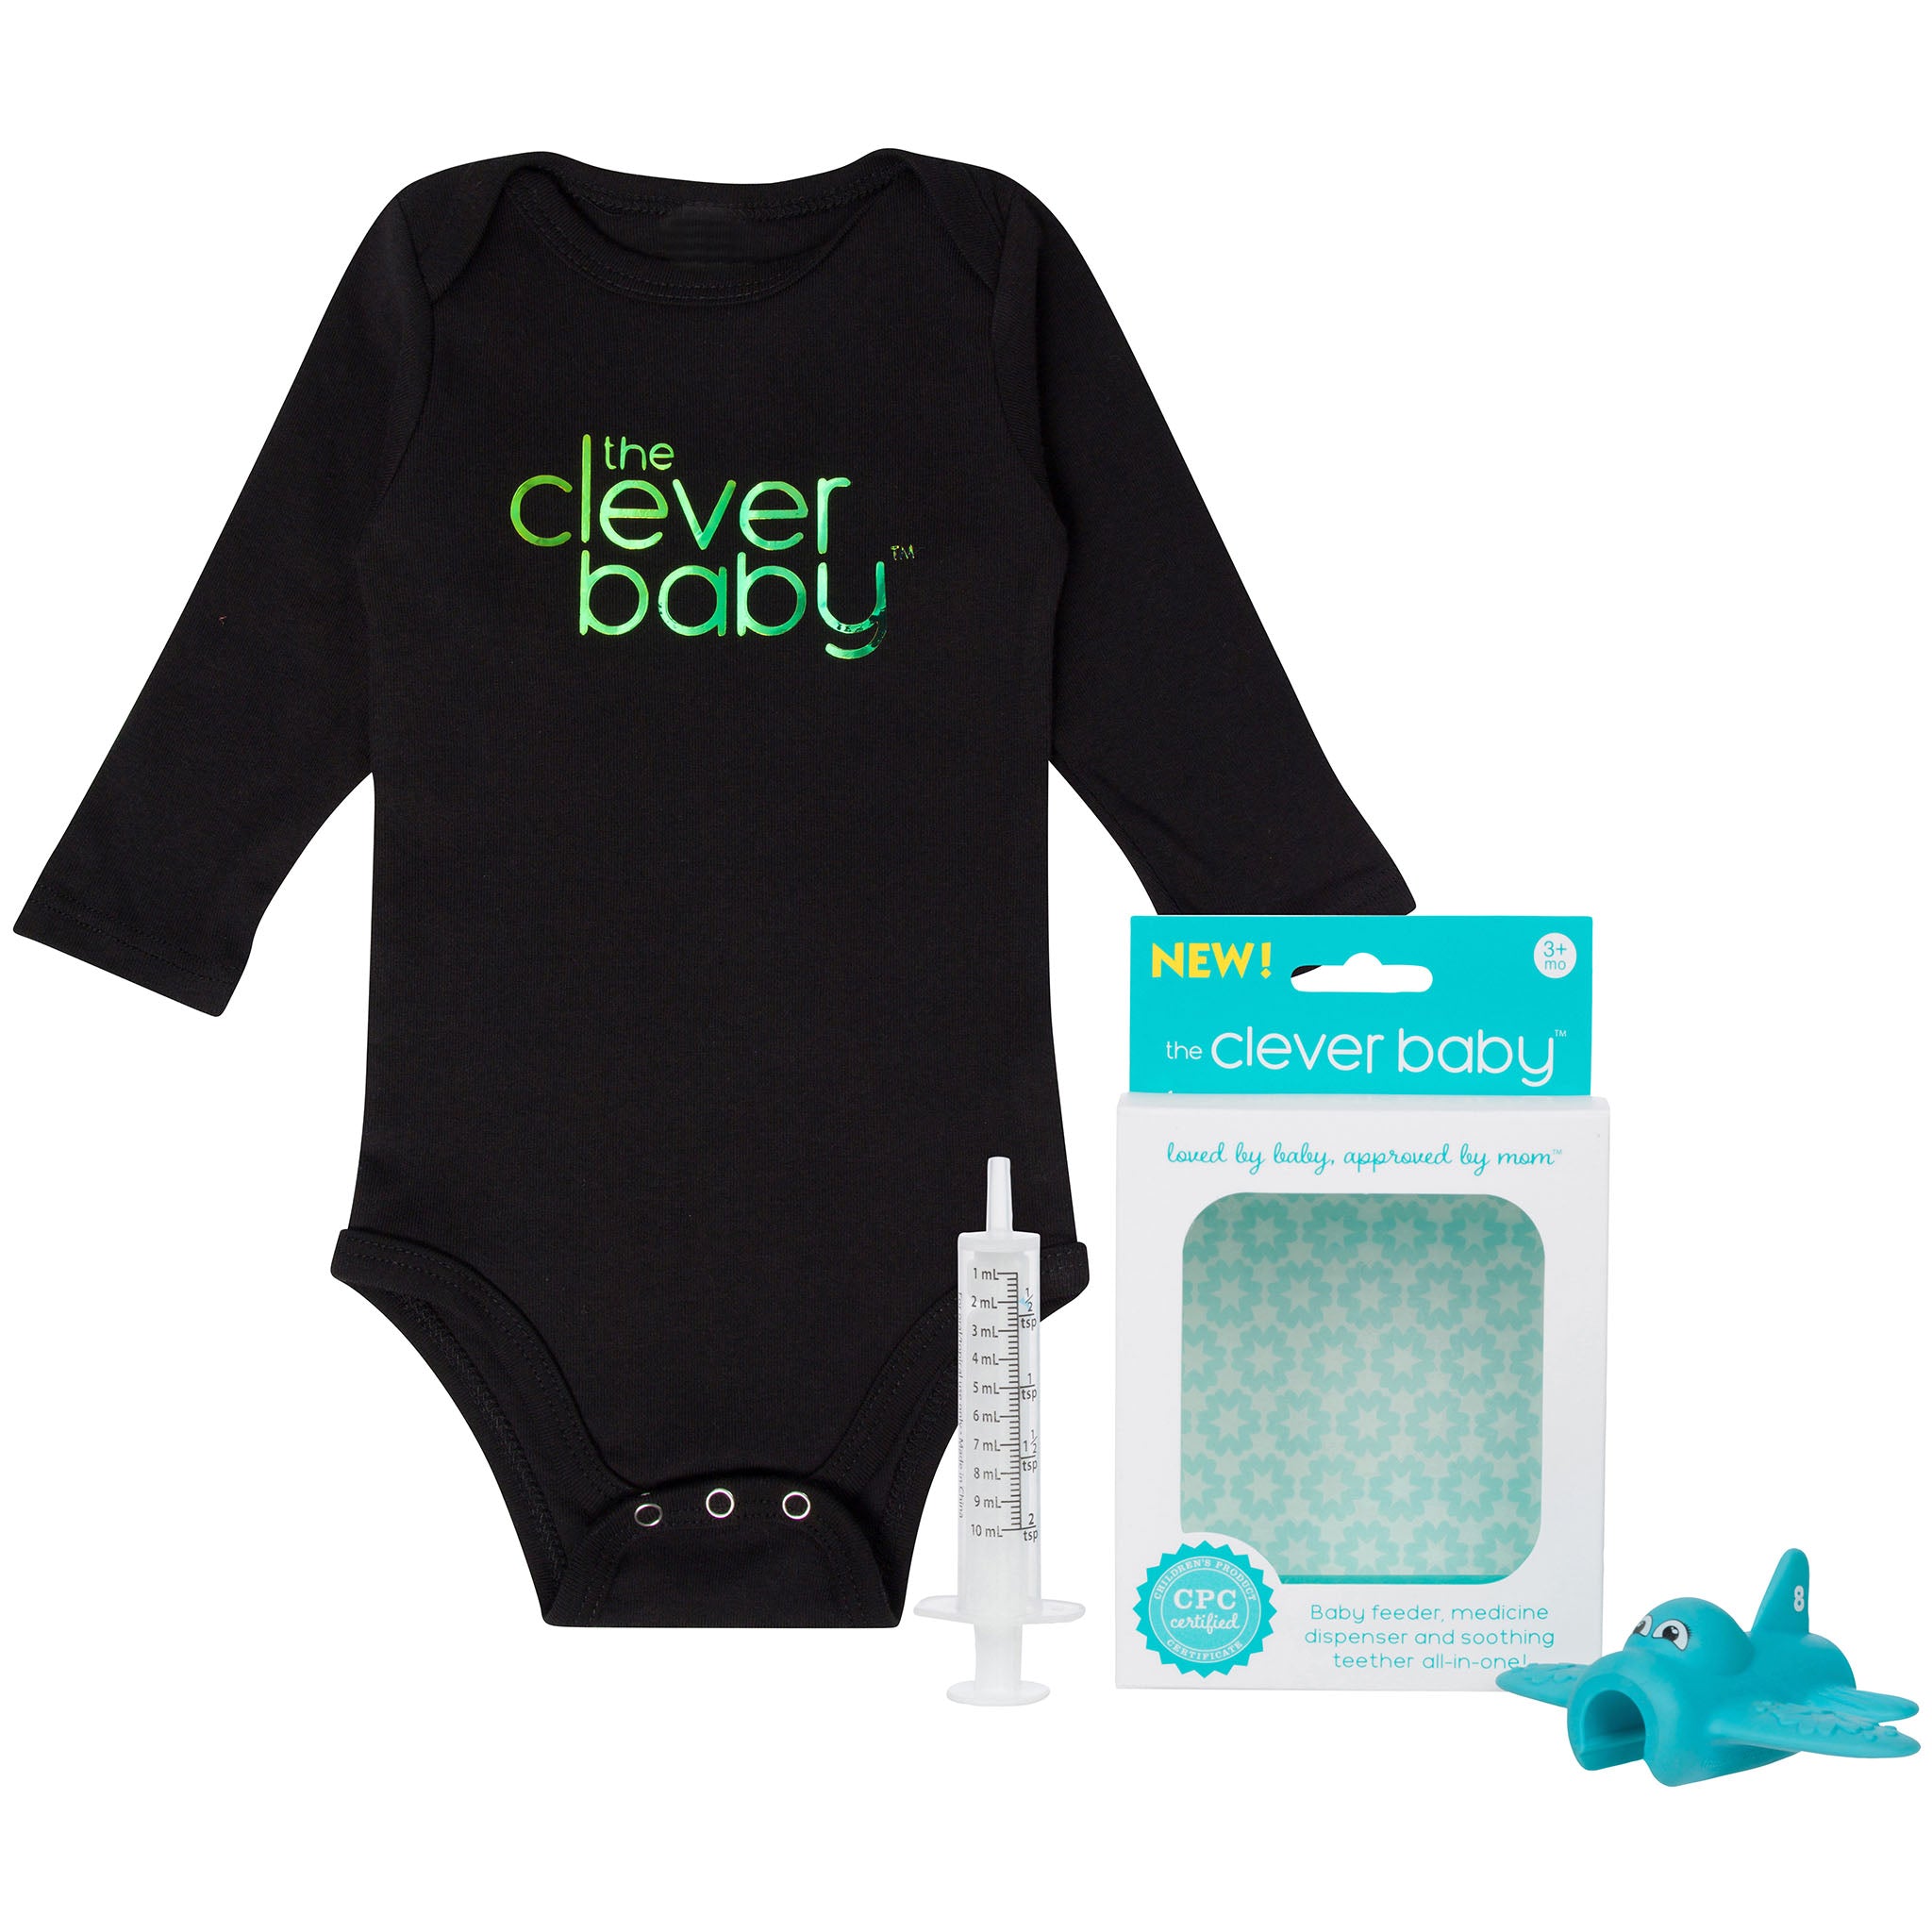 Black onesie with logo and Jet gift bundle